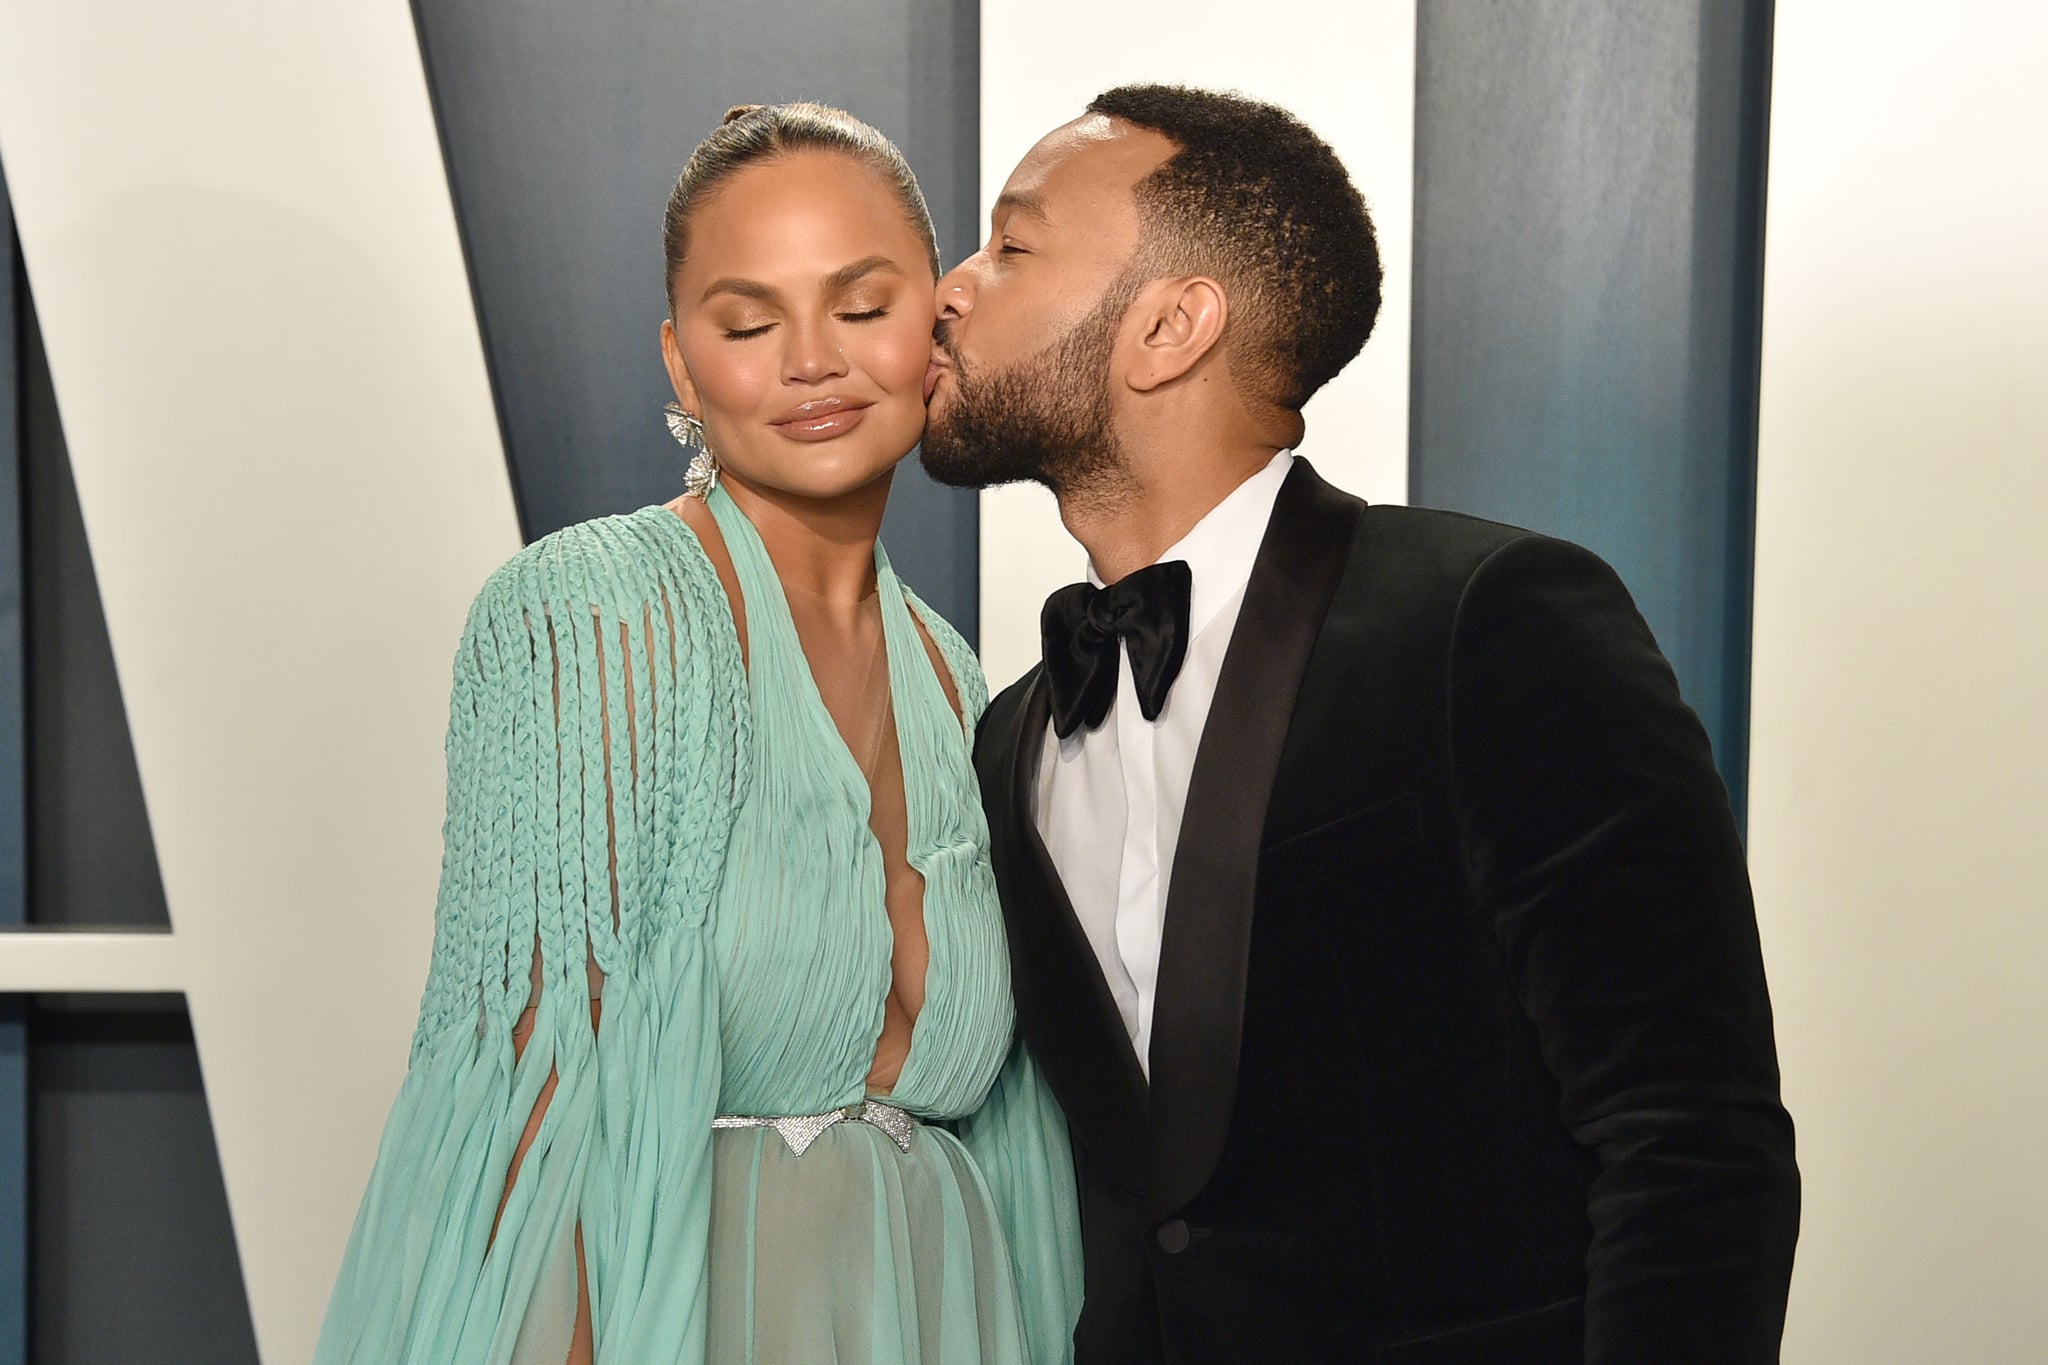 BEVERLY HILLS, CALIFORNIA - FEBRUARY 09: Chrissy Teigen and John Legend attend the 2020 Vanity Fair Oscar Party at Wallis Annenberg Center for the Performing Arts on February 09, 2020 in Beverly Hills, California. (Photo by David Crotty/Patrick McMullan via Getty Images)